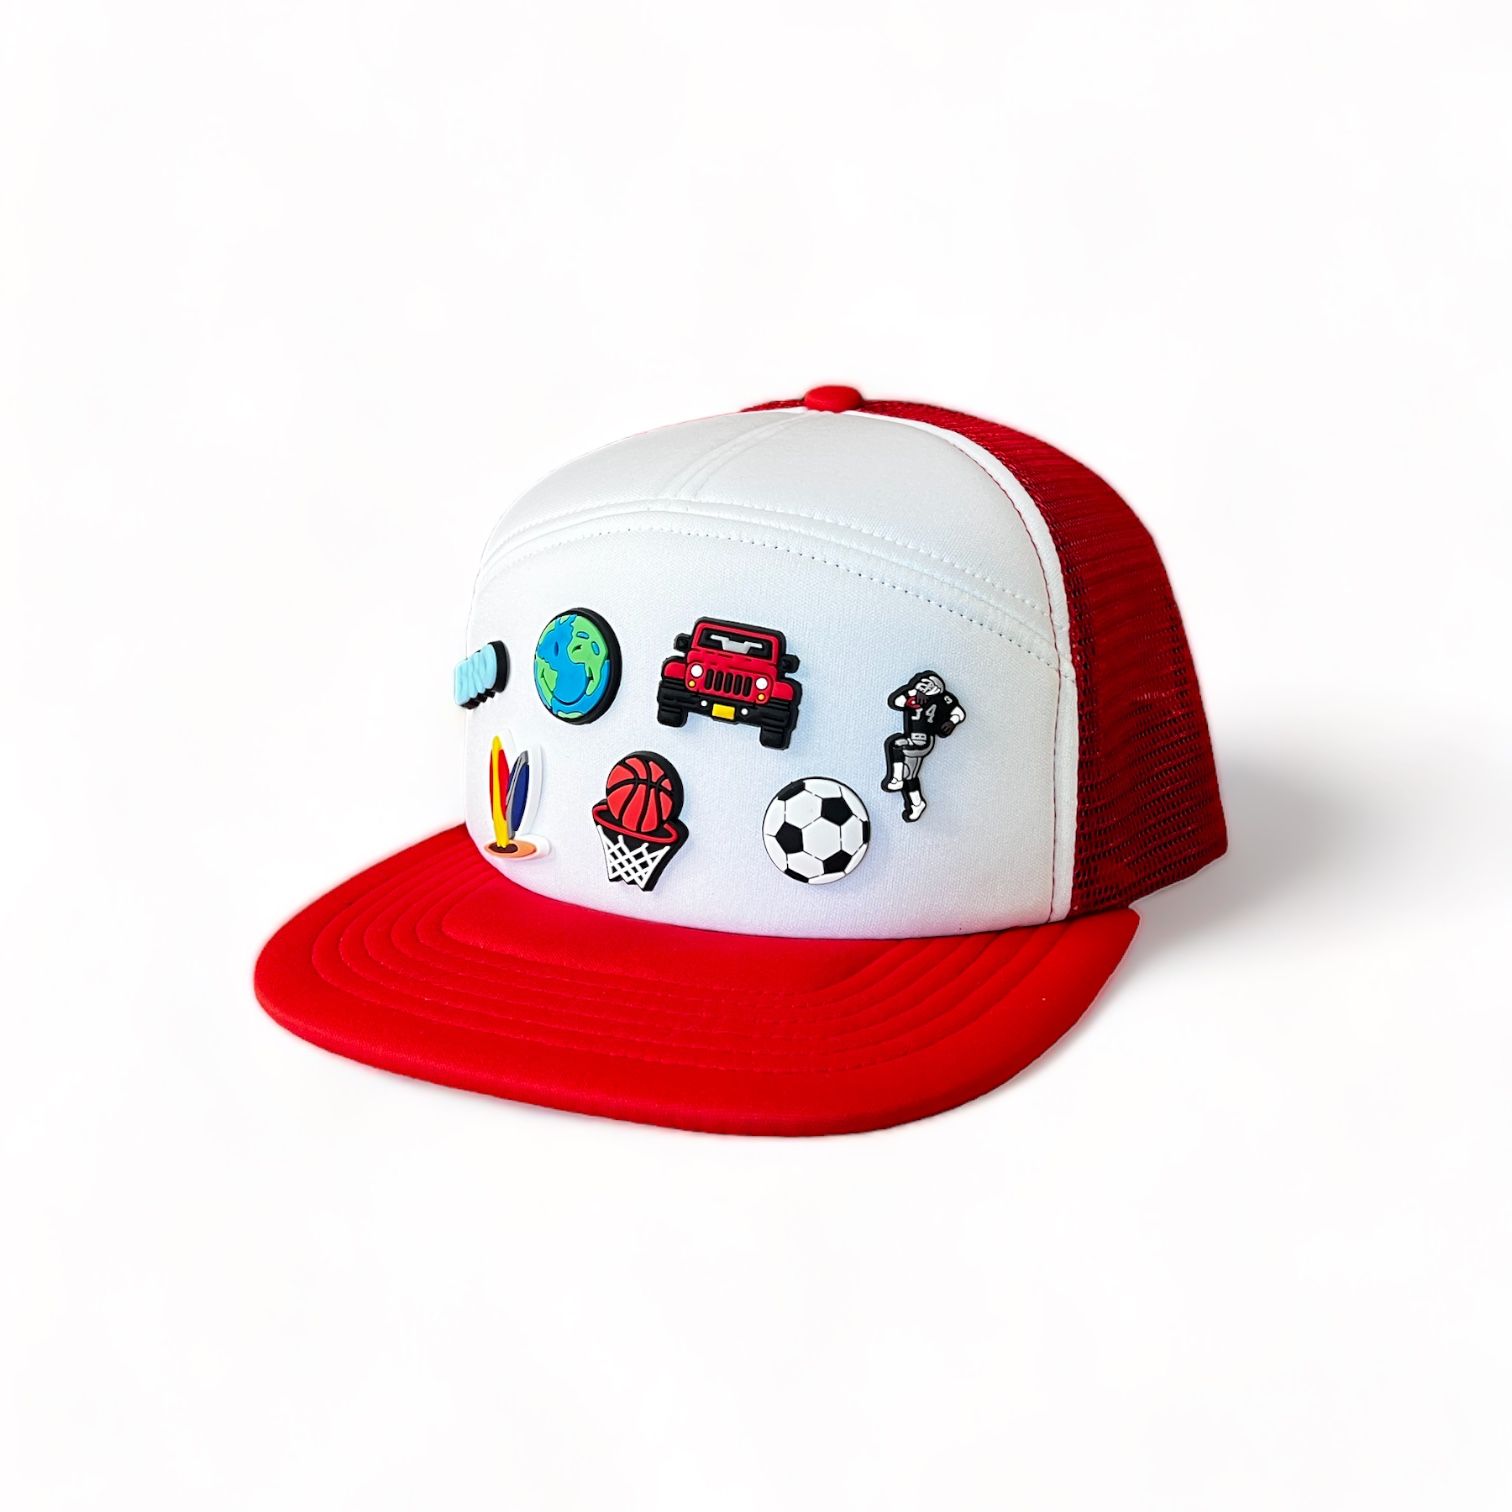 Home / Swap Top Hats / Youth 8+/Adult / Red Ranger – Swap Top (Youth 8+/Adult) | The Swap Top